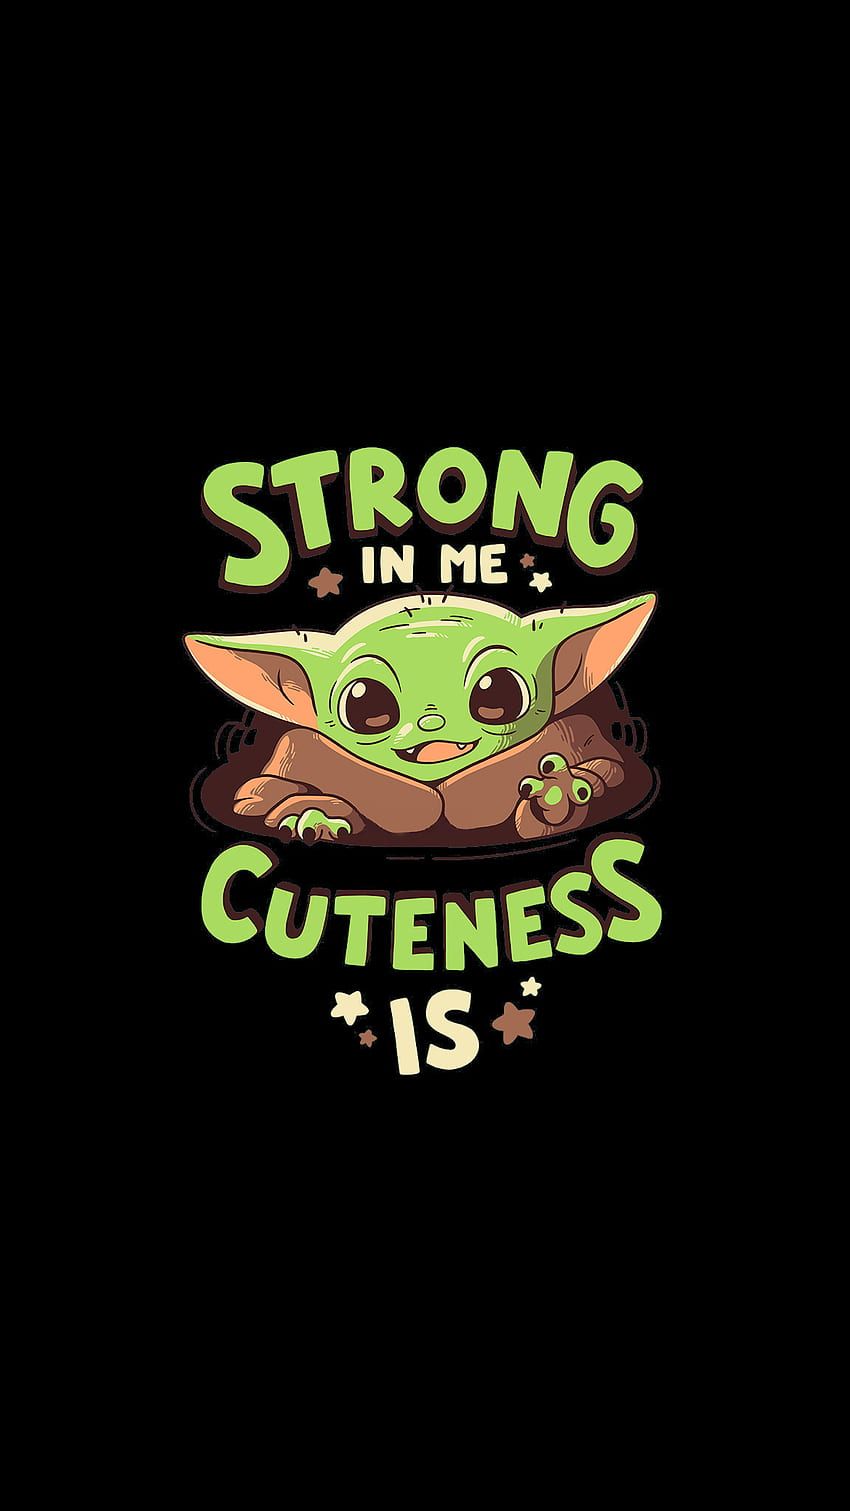 Strong in me cuteness is. - Baby Yoda